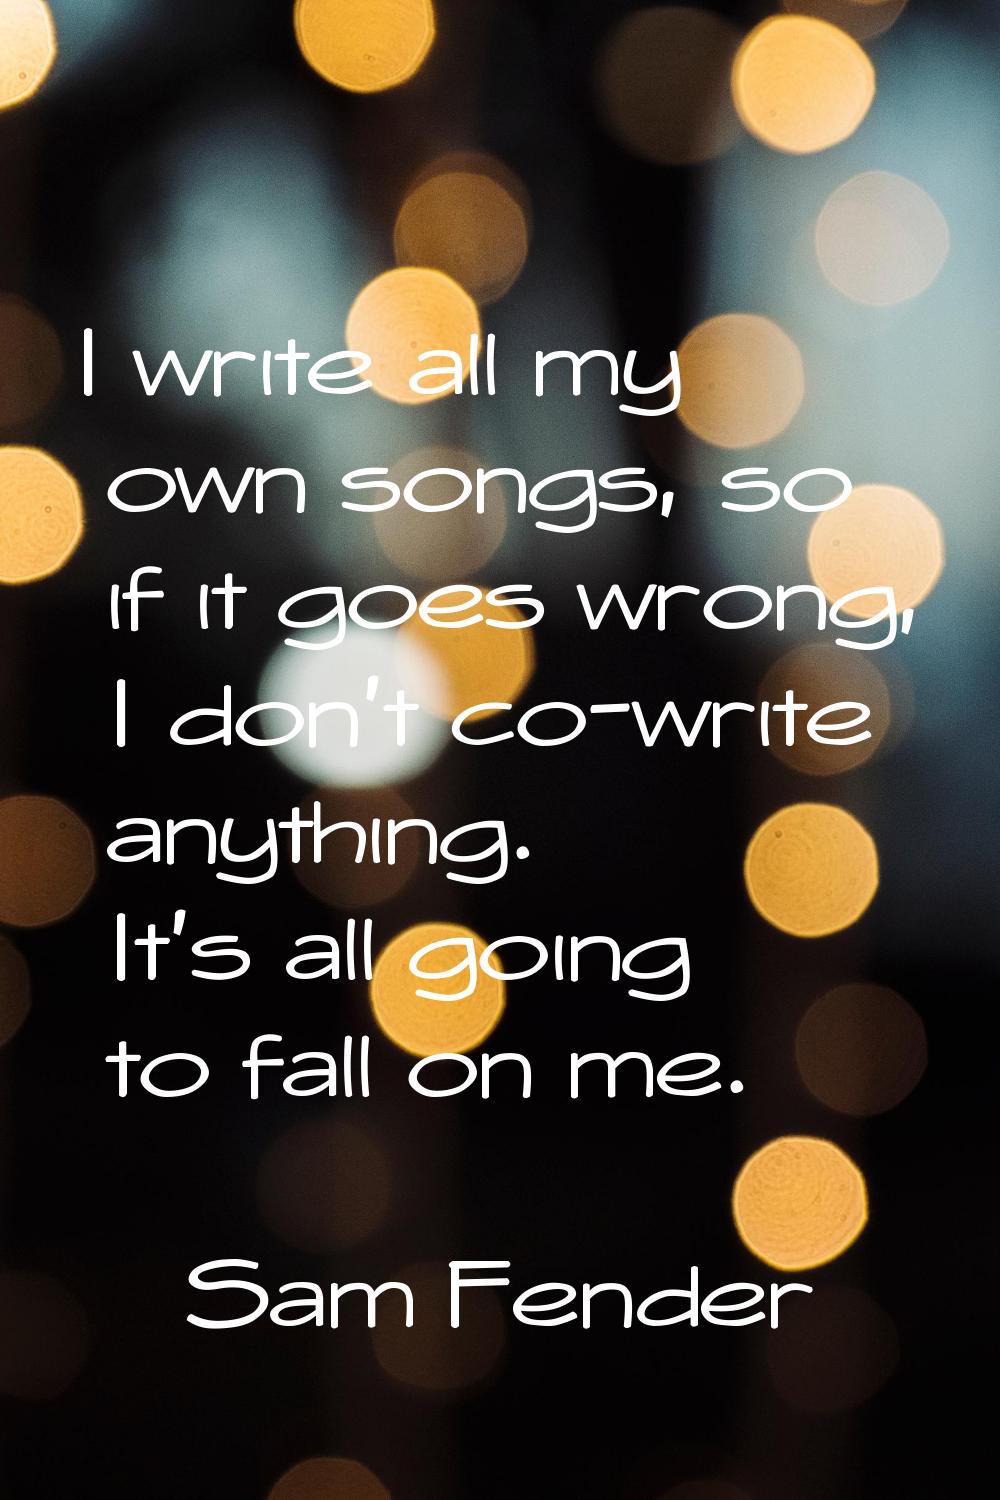 I write all my own songs, so if it goes wrong, I don't co-write anything. It's all going to fall on